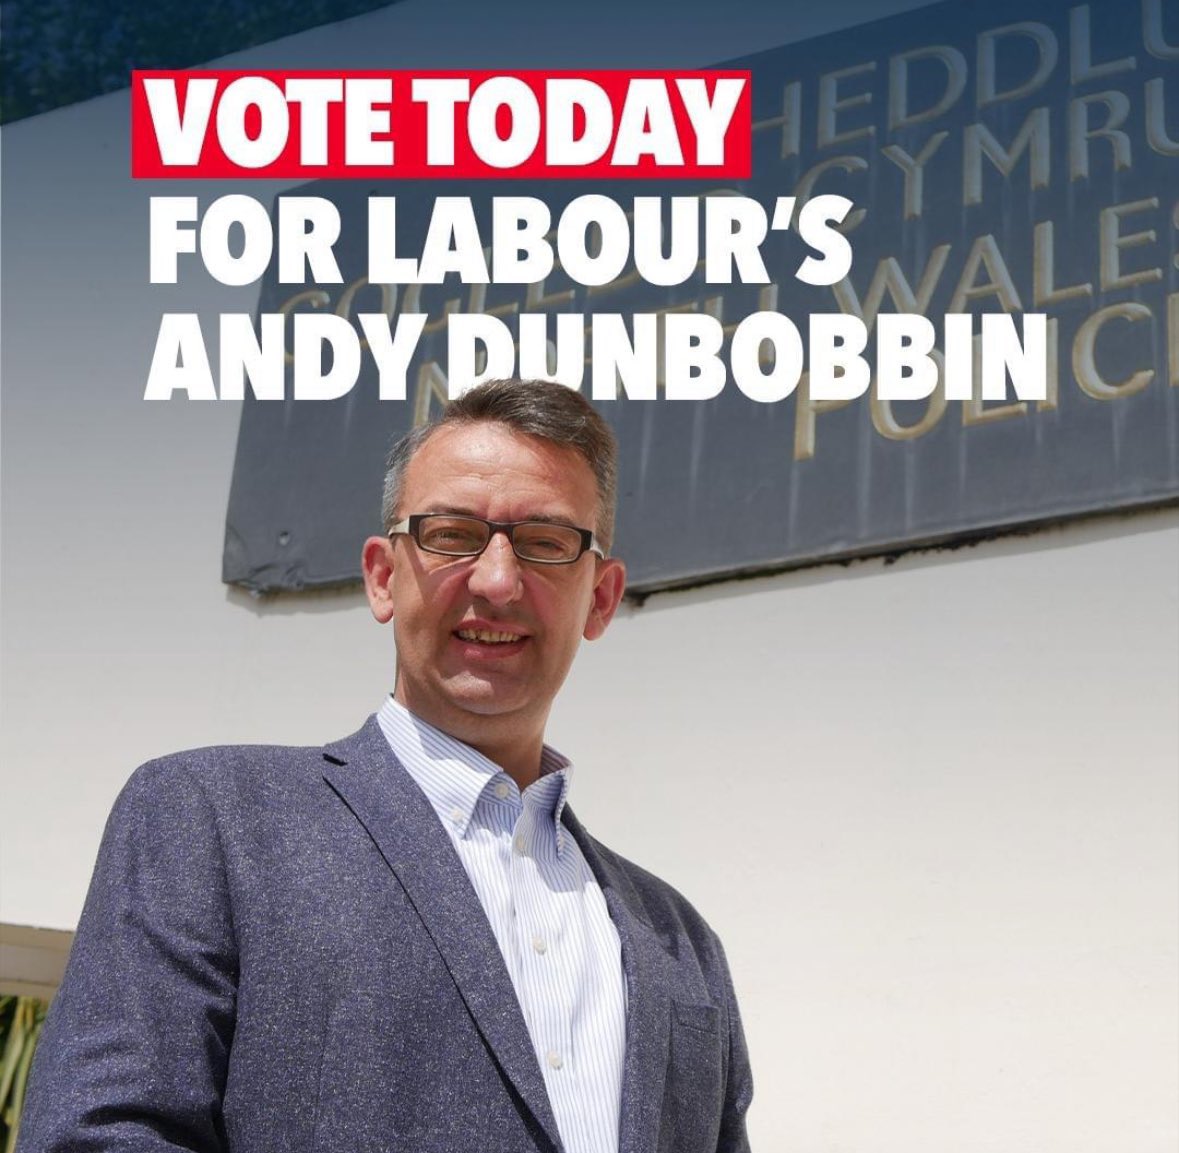 A pleasure to vote for @acdunbobbin today. It’s a beautiful day in Clwyd East, perfect for strolling down to the polling station. Please make your voice heard!